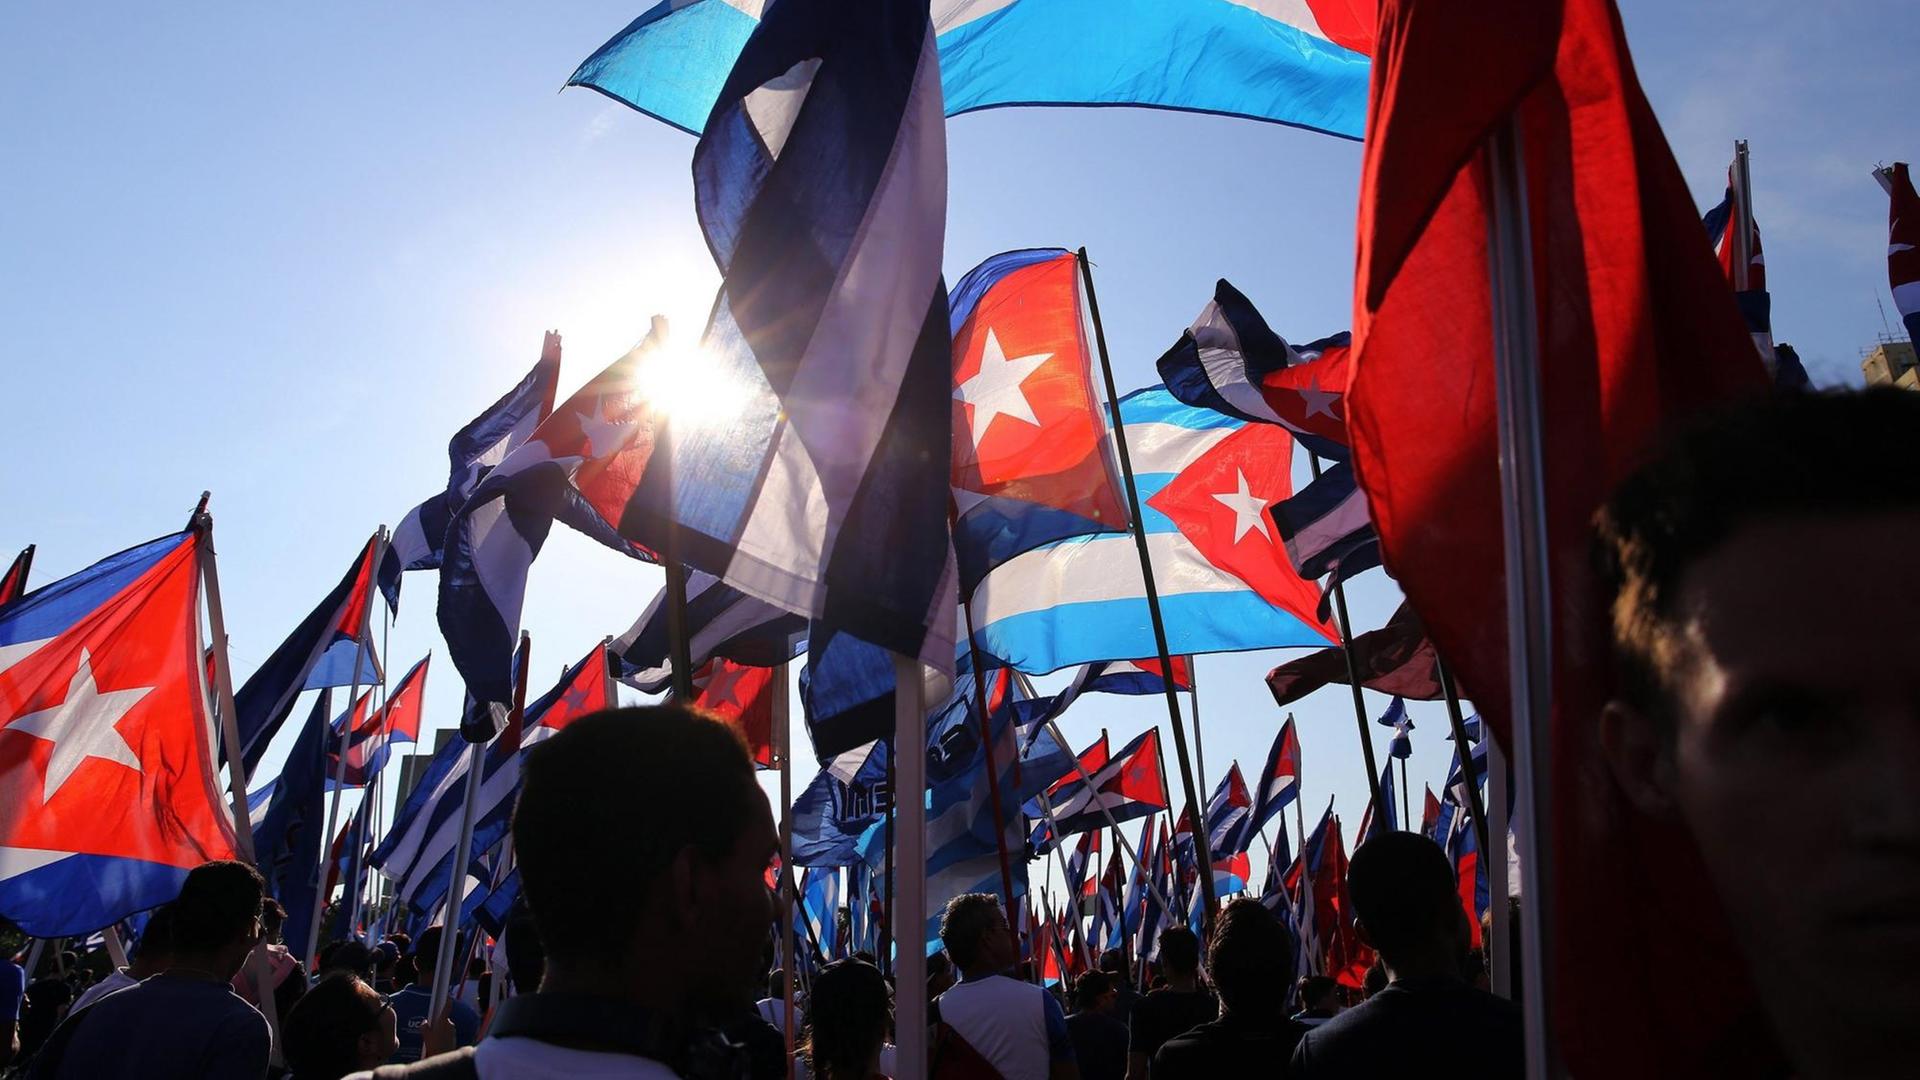 The International Workers Day parade at Plaza de la Revolucion square in Havana, Cuba, 01 May 2016. Labour Day, or May Day, is observed all over the world on the first day of May to celebrate the economic and social achievements of workers and fight for labourers rights.